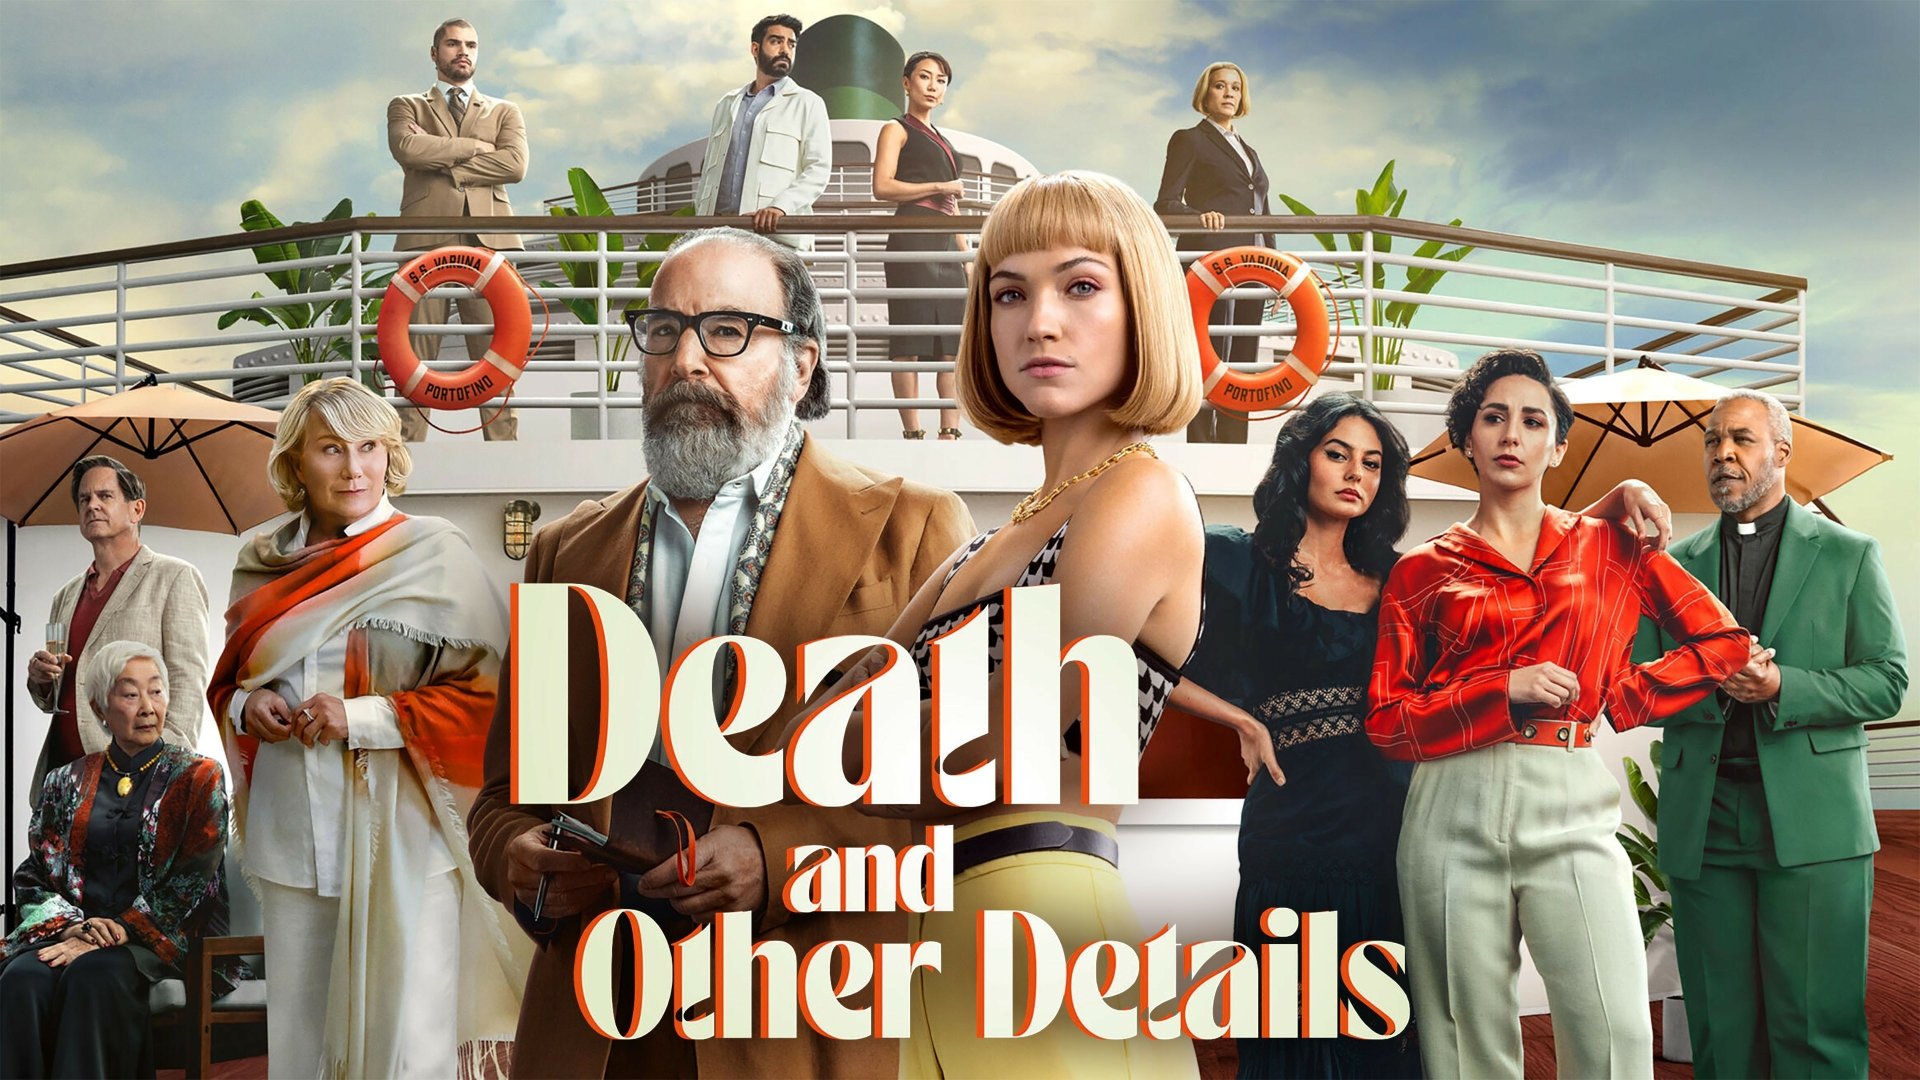 HD desktop wallpaper featuring characters from the TV show Death and Other Details posed on a boat deck.